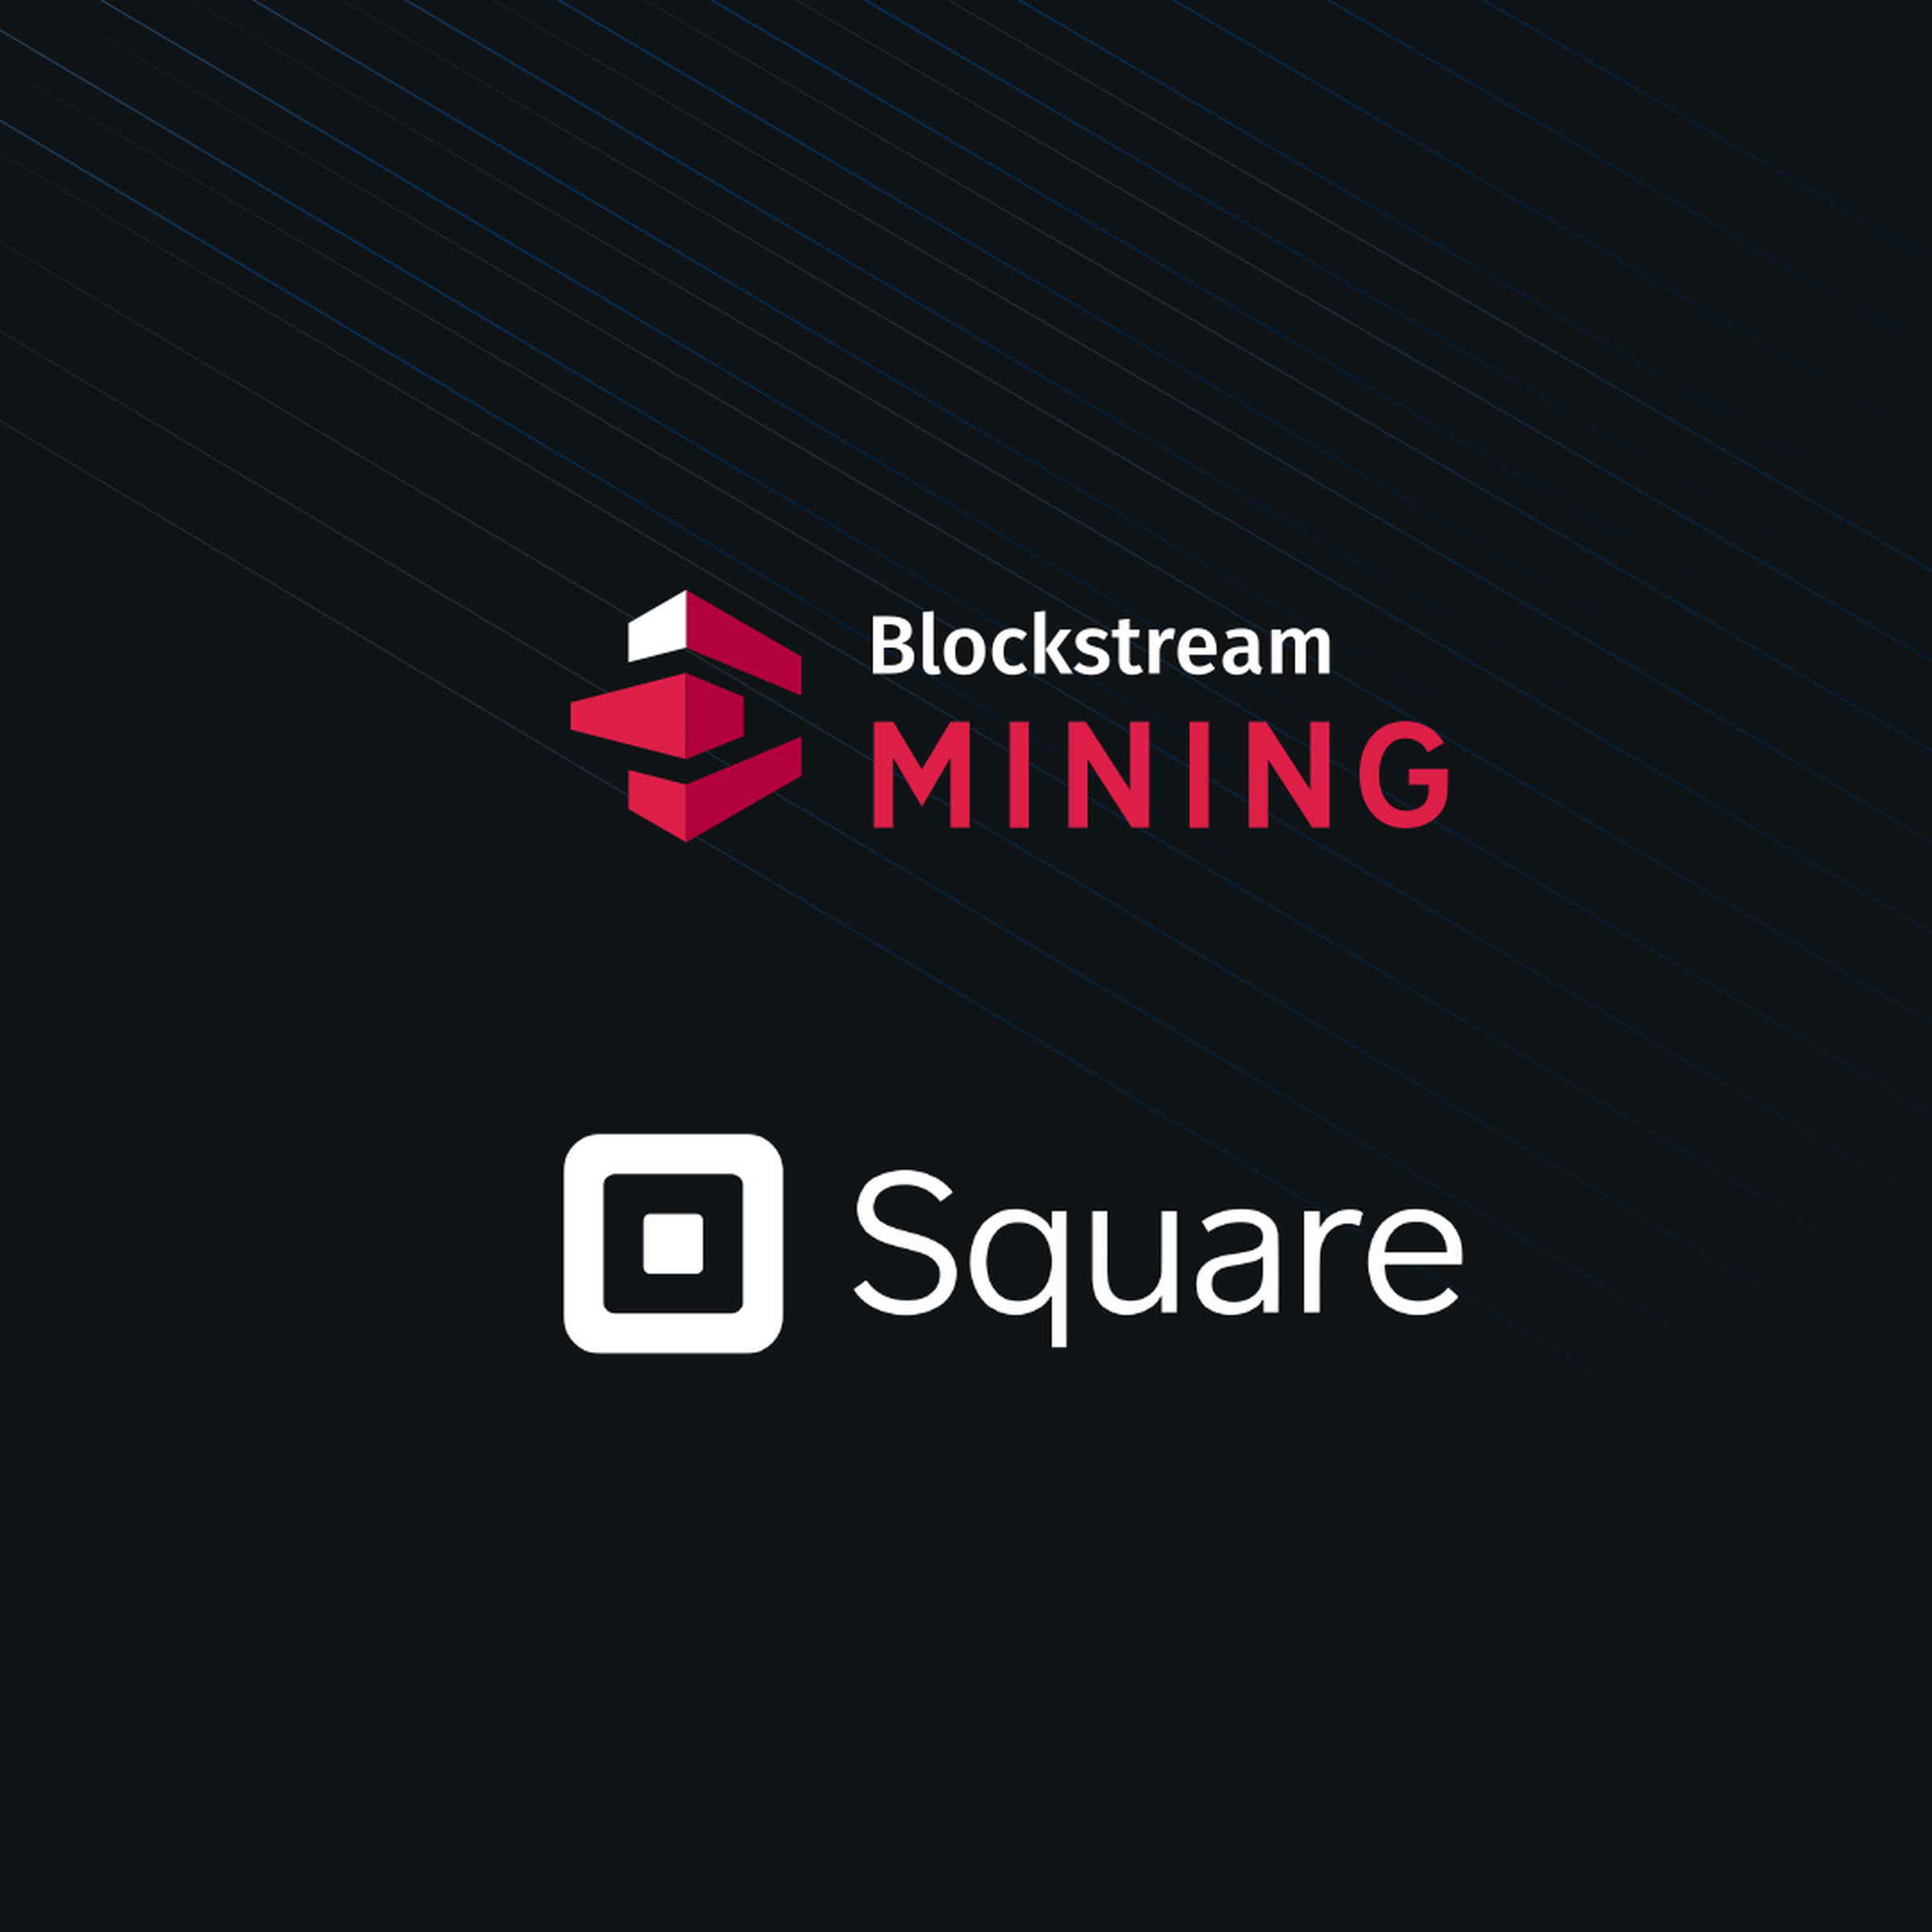 Square and Blockstream are partnering on a solar-powered bitcoin mining facility